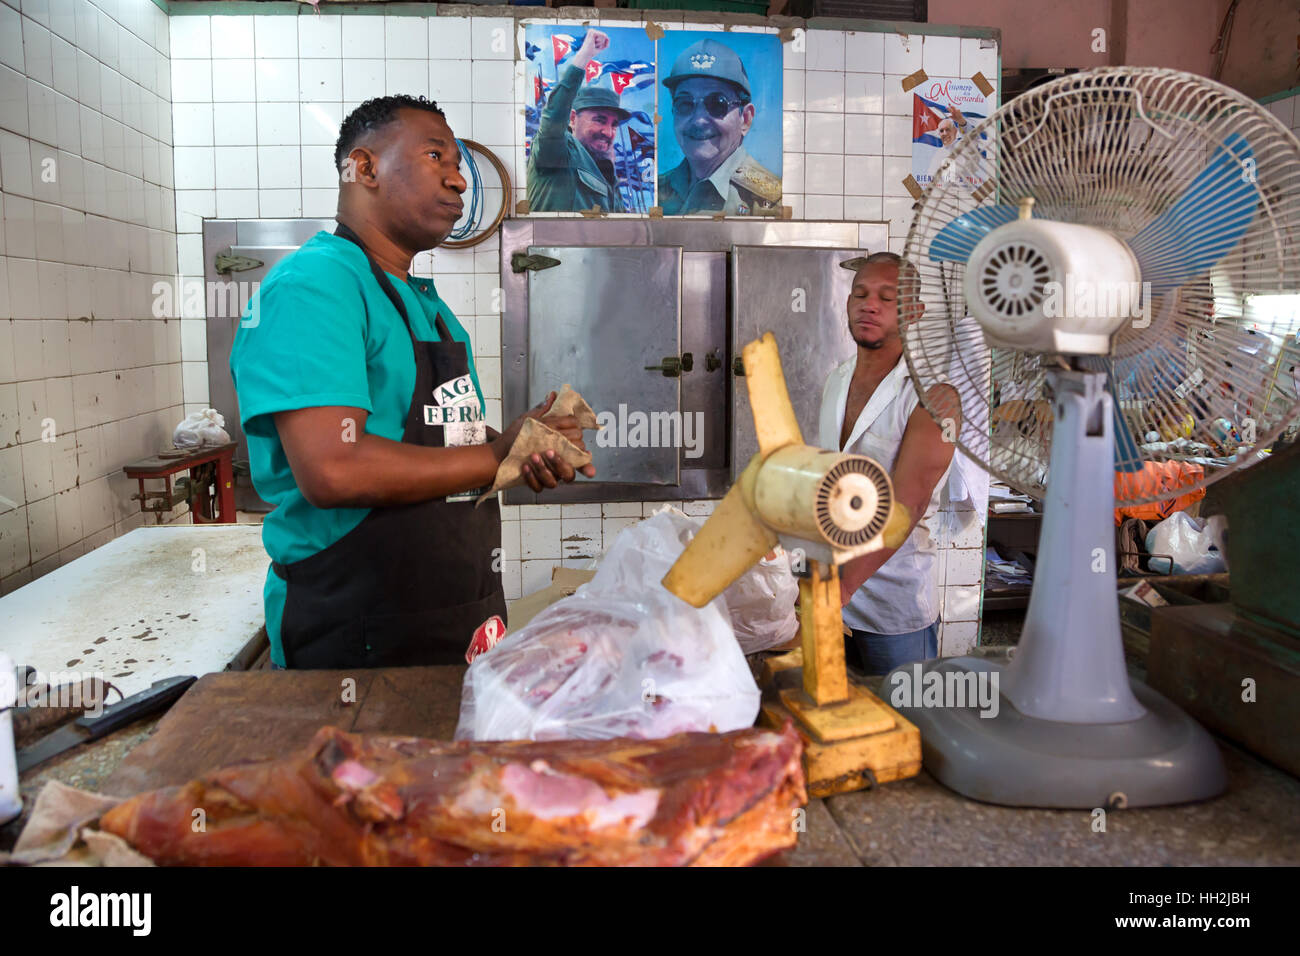 Men at work in a shop in havana with Fidel and raul Castro at the back on the walls Stock Photo